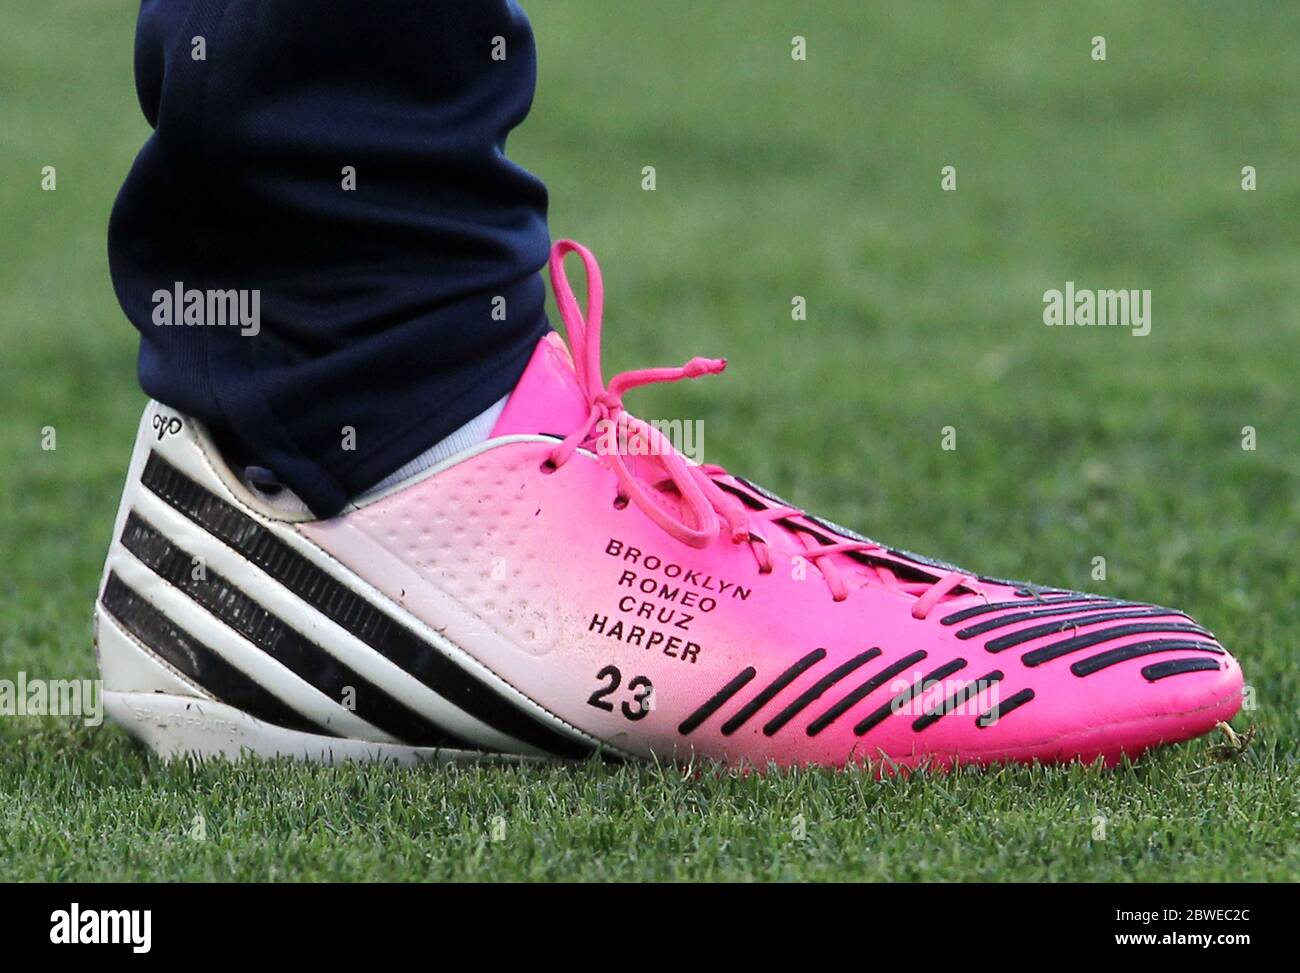 David Beckham wears pink football boots with his childrens names on them as  he came on as a substitute in LA Galaxy's 1-0 defeat to Chivas USA, Carson,  California. 19 May 2012